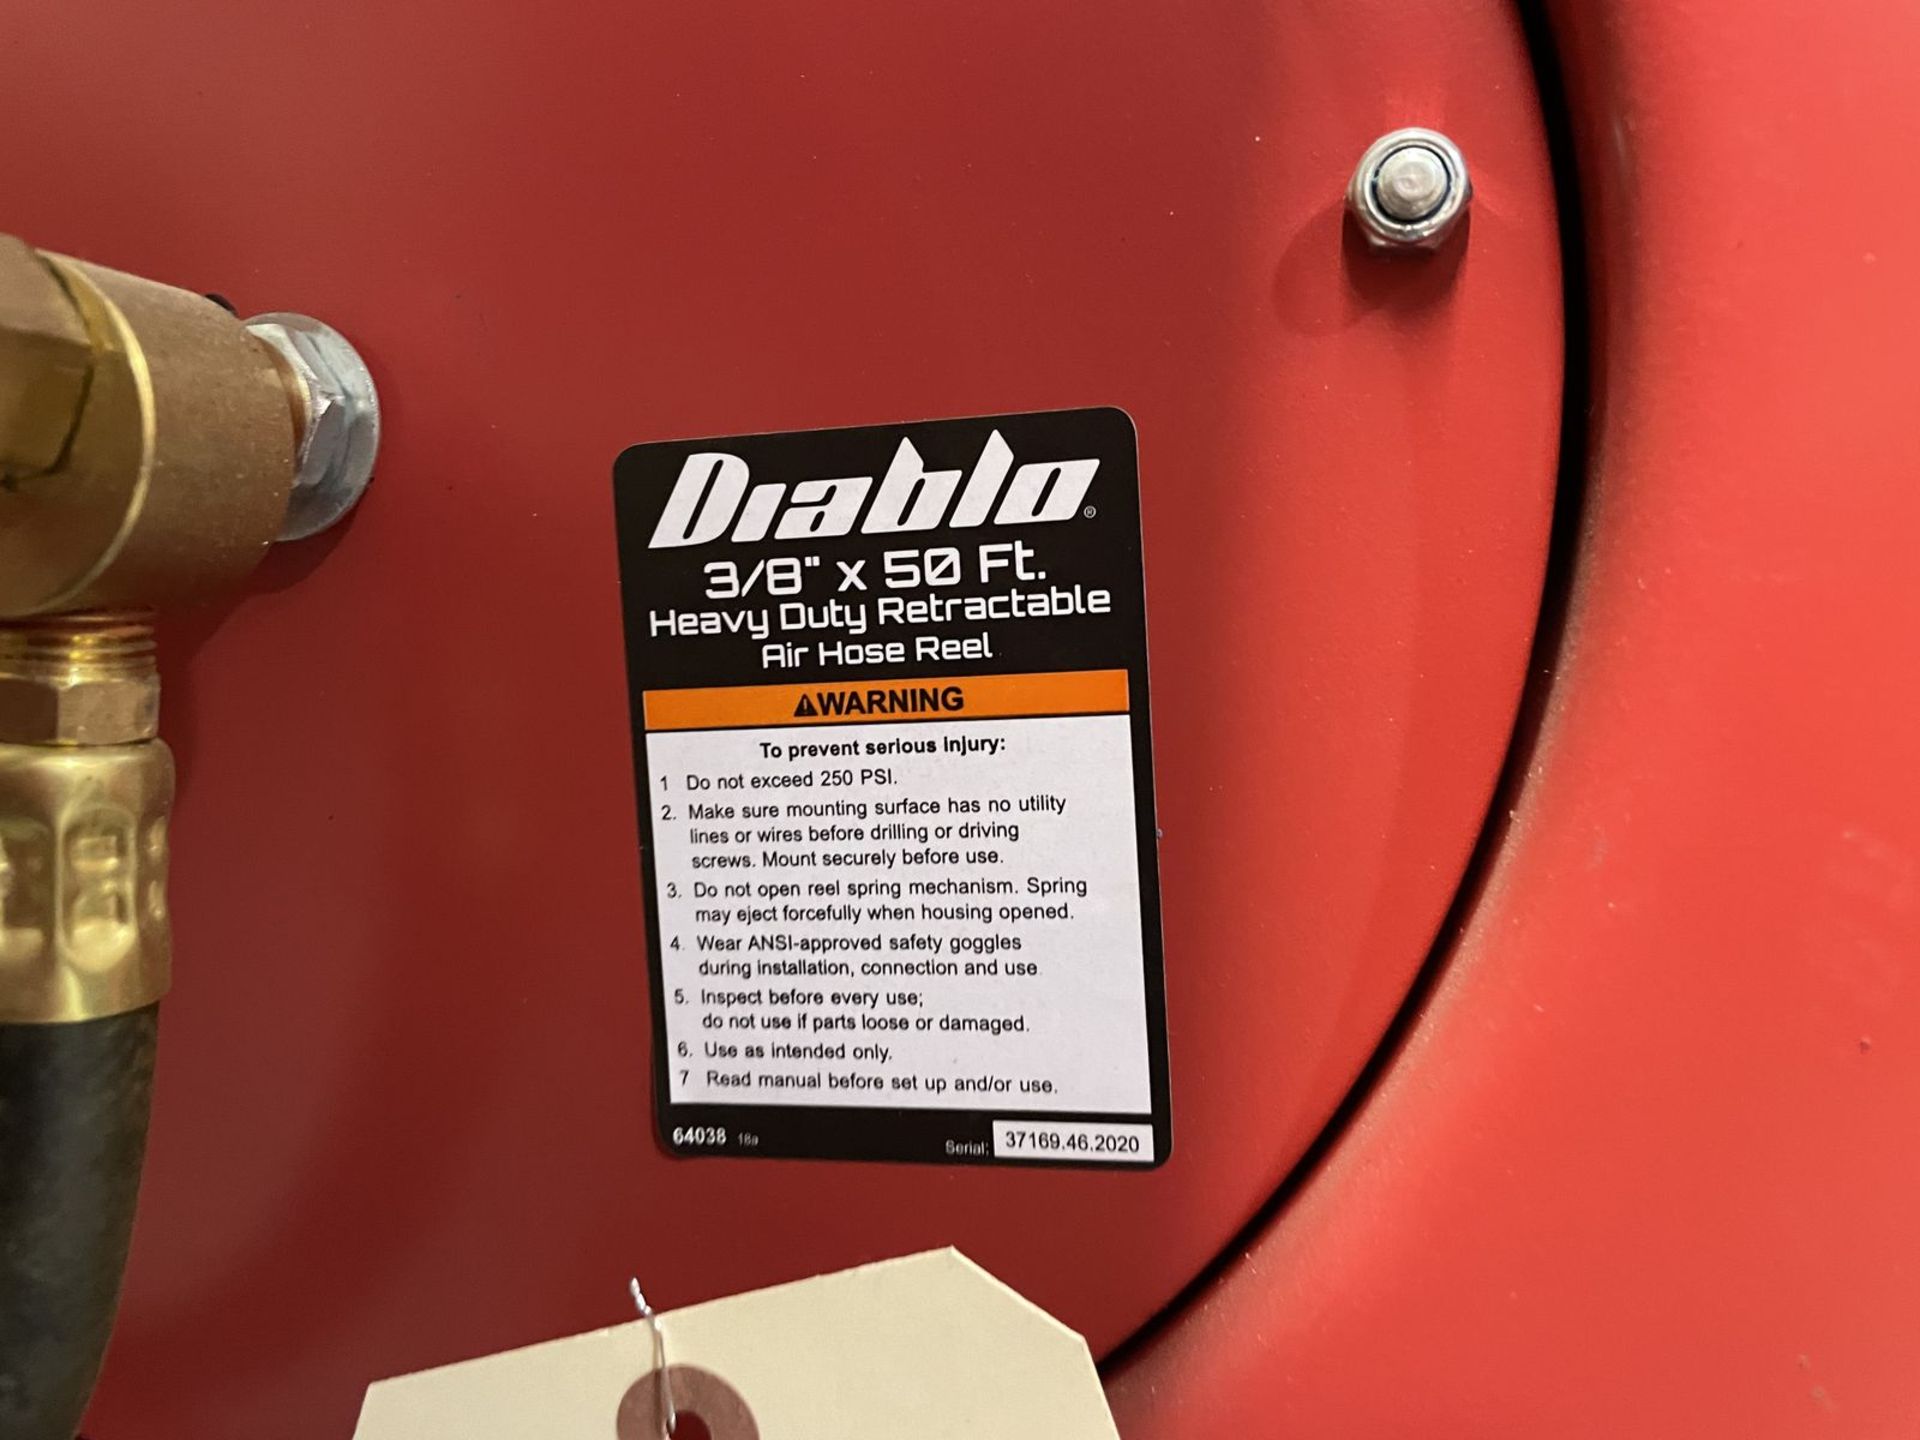 Diablo 3/8" x 50' Heavy Duty Retractable Air Hose Reel with Central Pneumatic Air Filter - Image 2 of 3